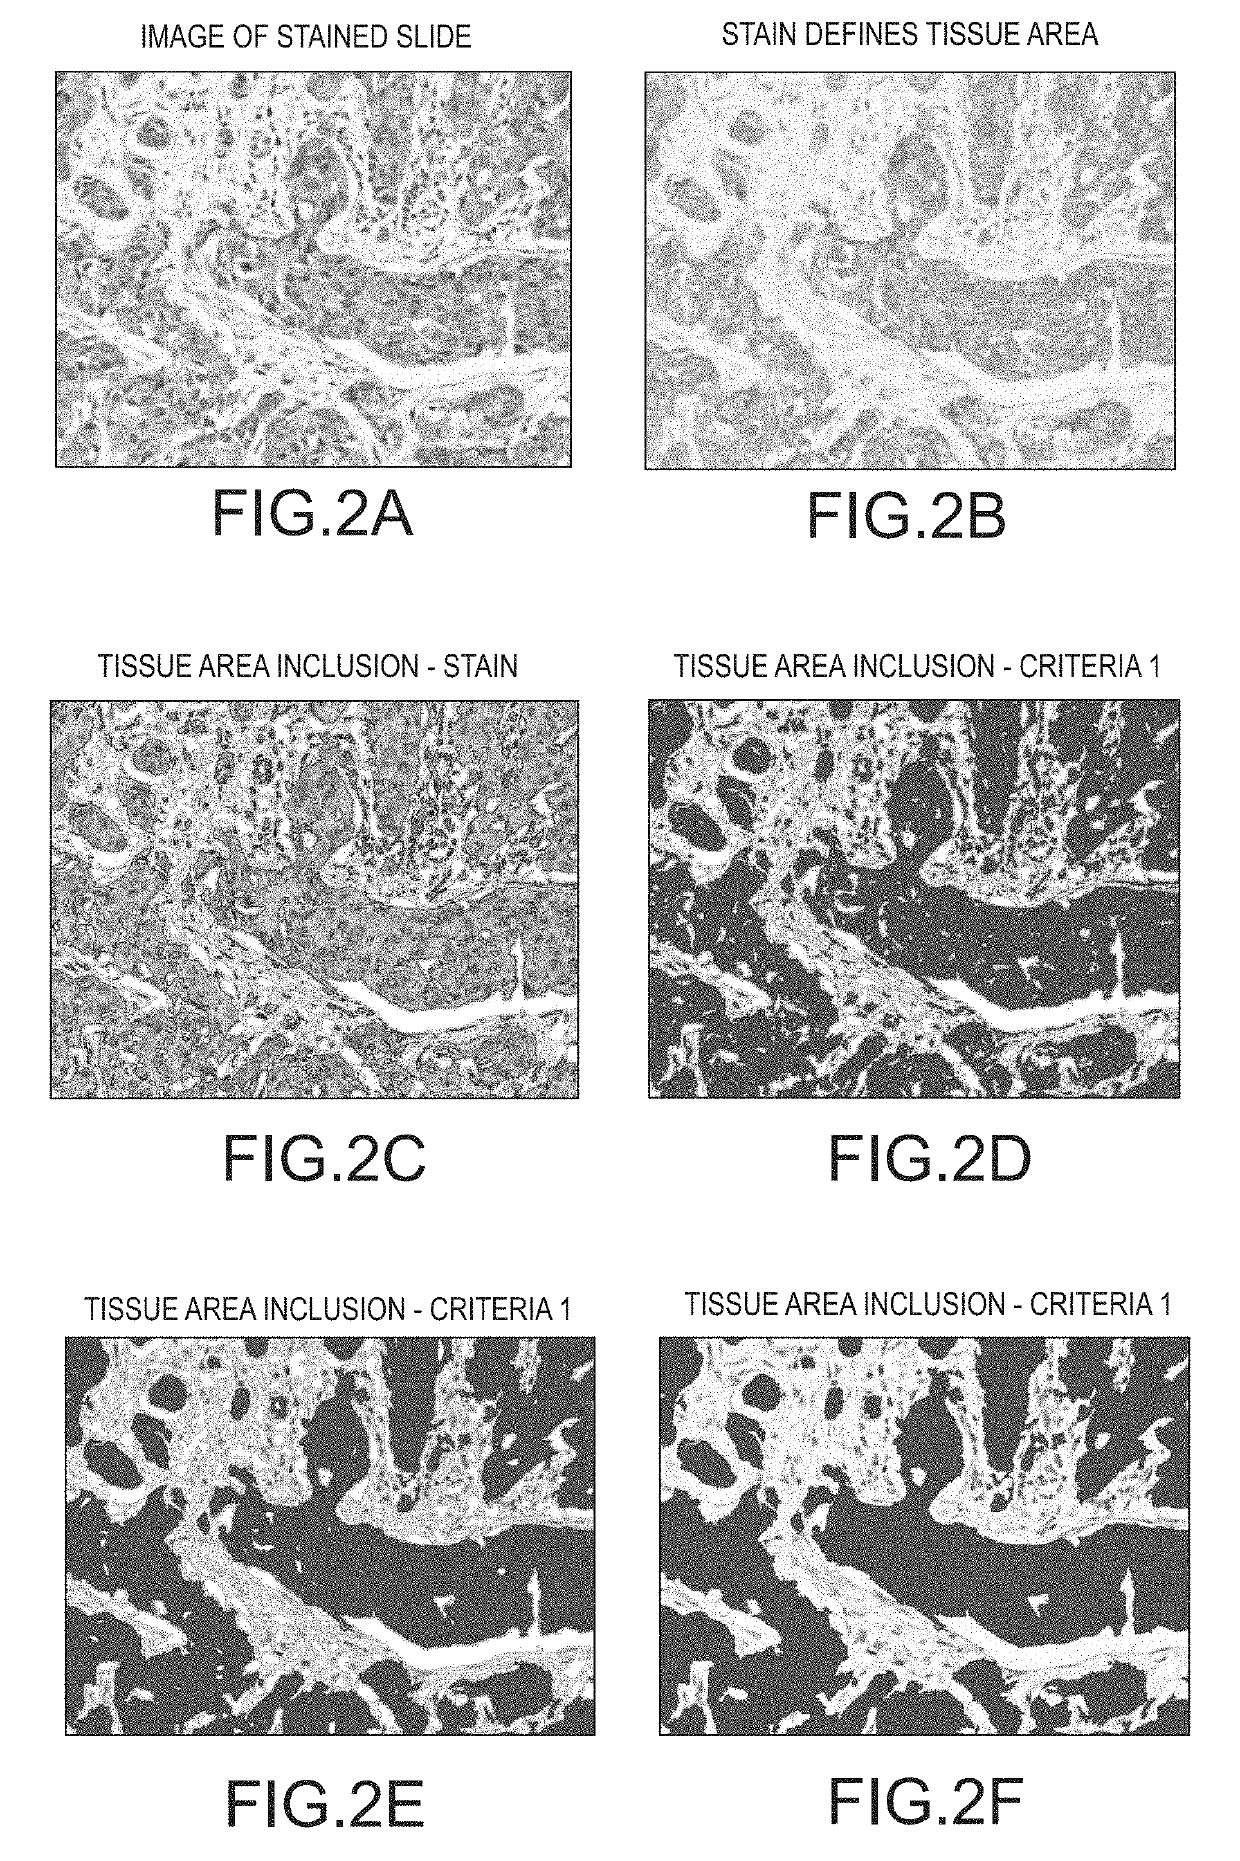 Method for assigning tissue normalization factors for digital image analysis